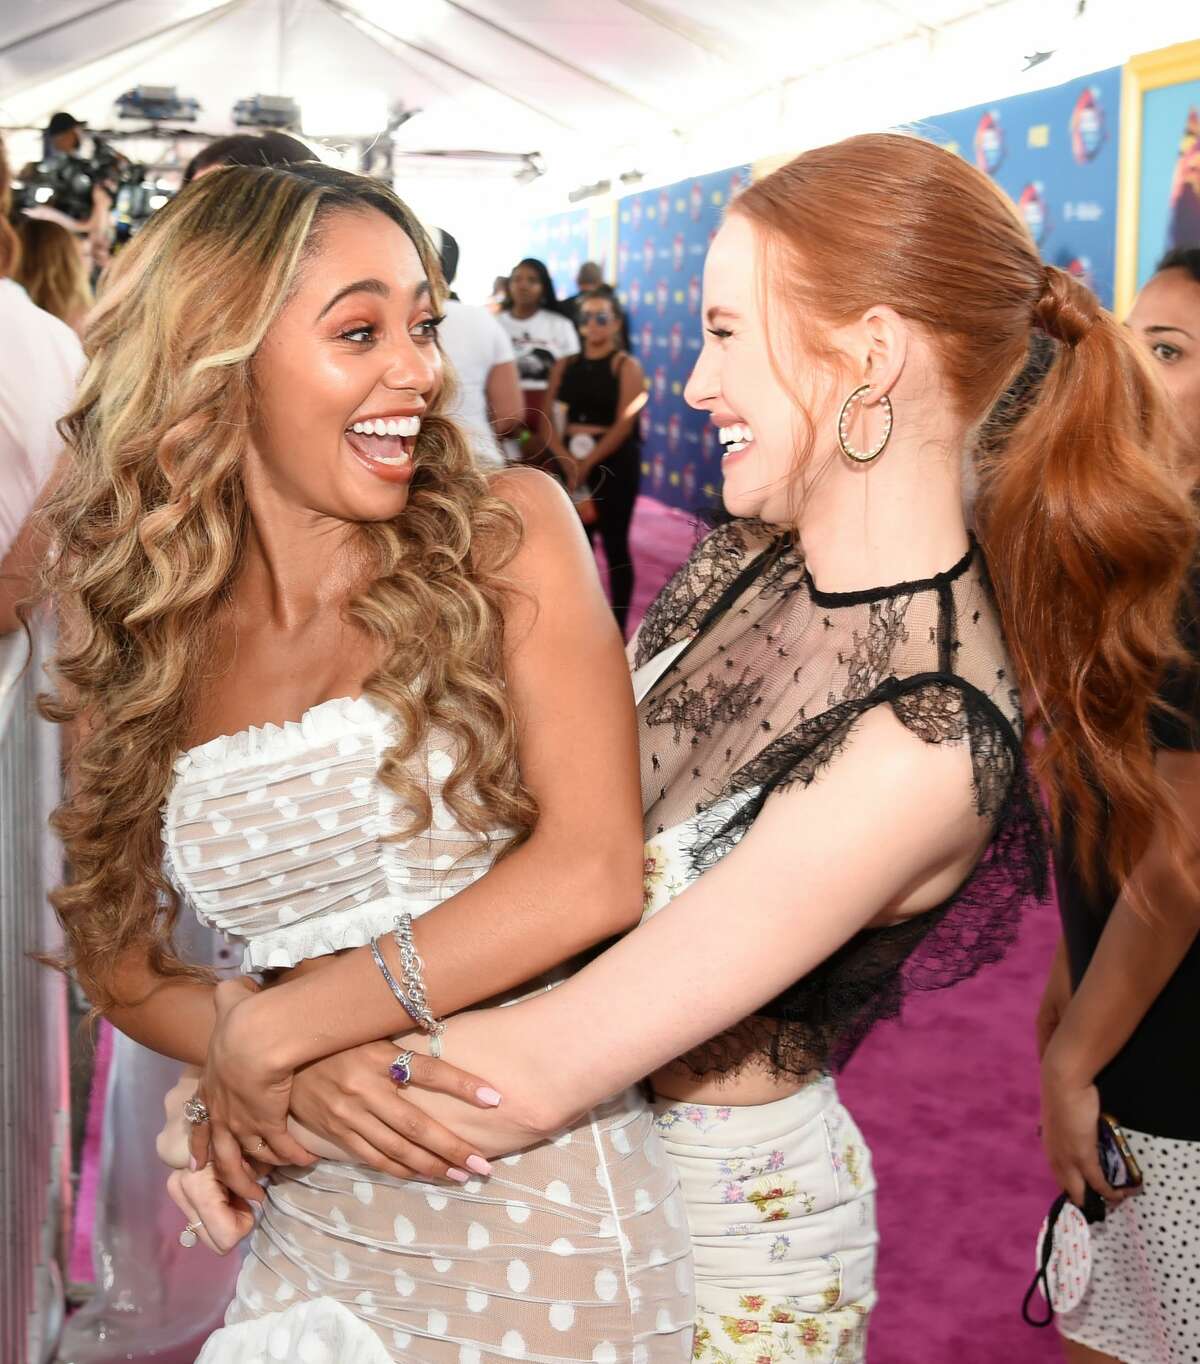 Vanessa Morgan and Madelaine Petsch attend FOX's Teen Choice Awards at The Forum on Aug. 12, 2018 in Inglewood, California. (Photo by Kevin Mazur/Getty Images)